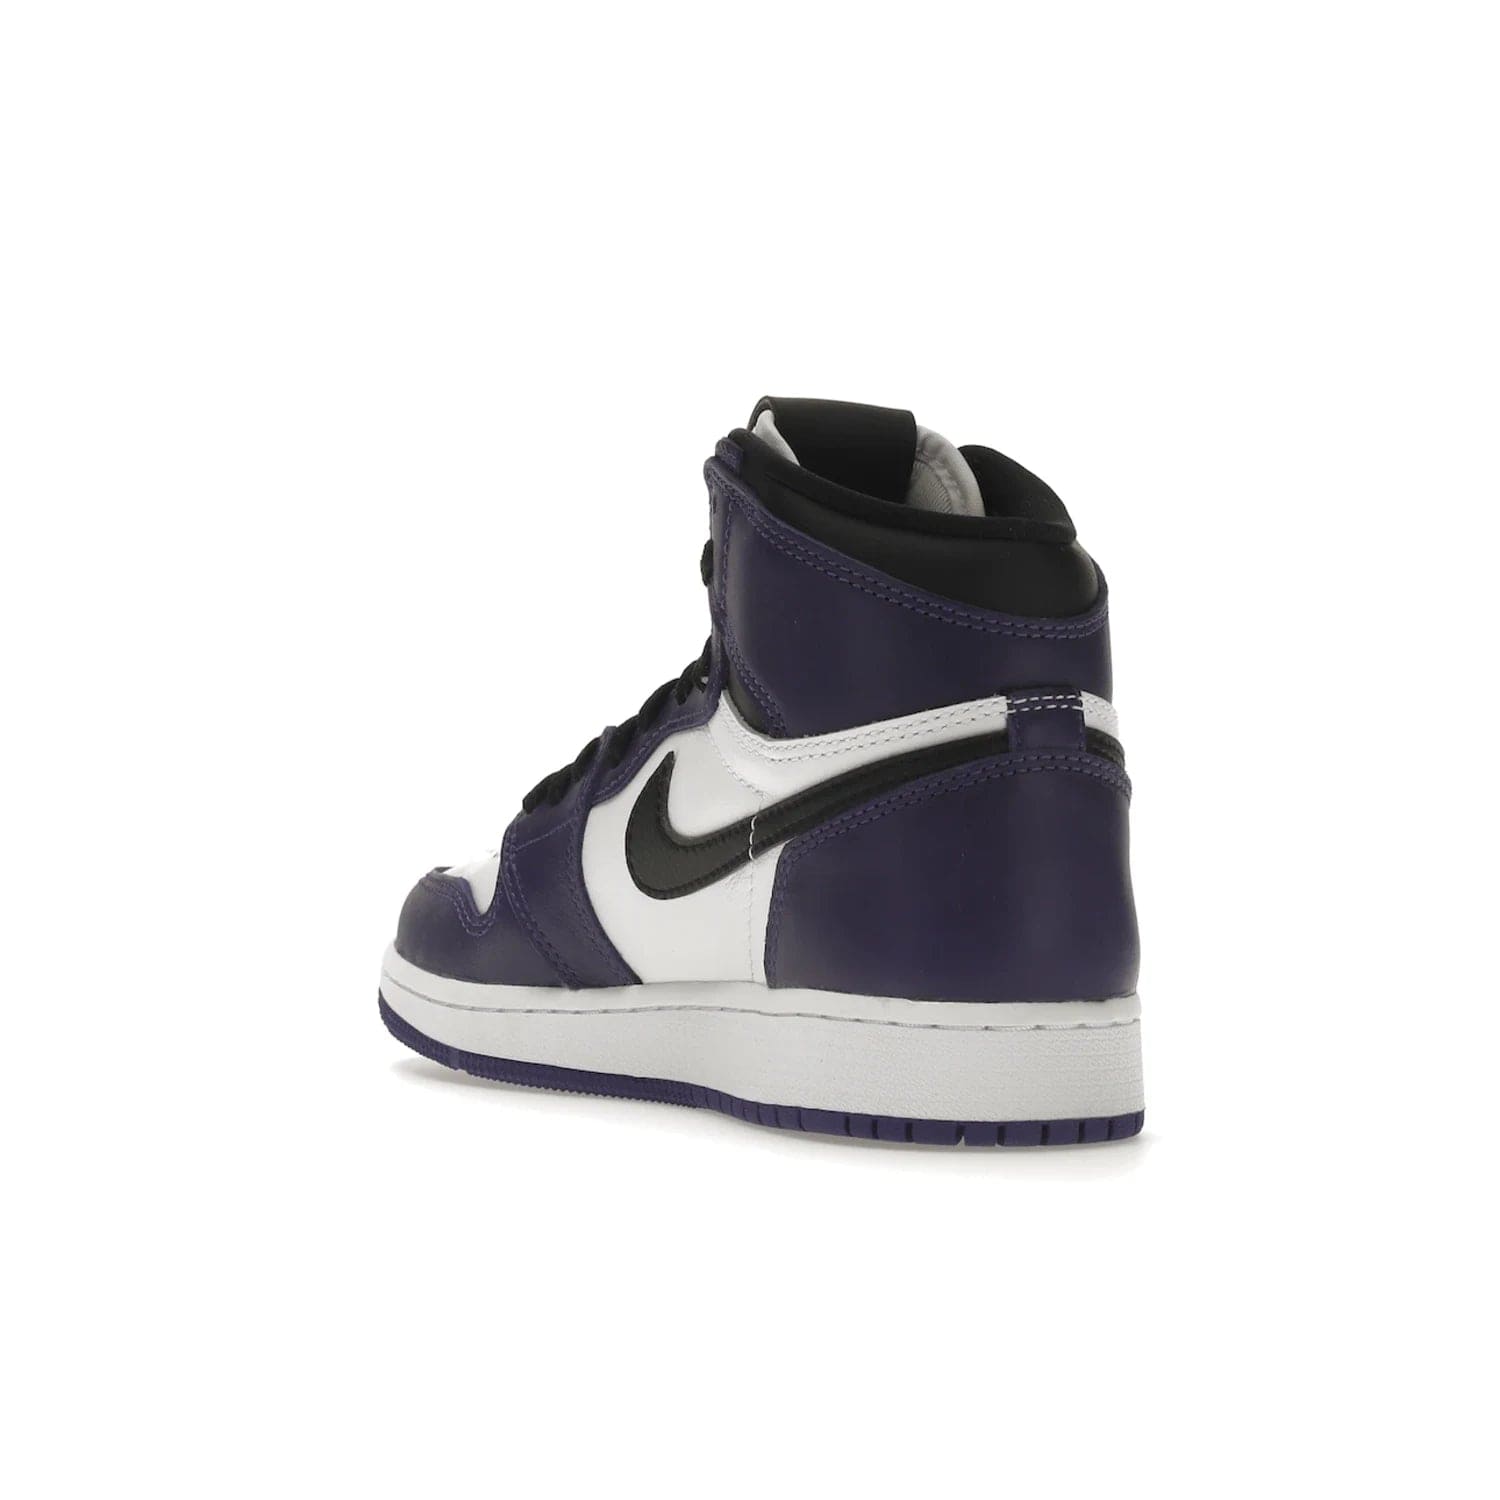 Jordan 1 Retro High Court Purple White (GS) - Image 25 - Only at www.BallersClubKickz.com - The Air Jordan 1 Retro High Court Purple is here and young sneaker heads can show off classic style. Features a white tumbled leather upper, black swoosh, purple overlays, black collar with purple overlay, white tongue, black patch with purple Nike Air logo and swoosh, white midsole, and purple rubber outsole with circular pattern.